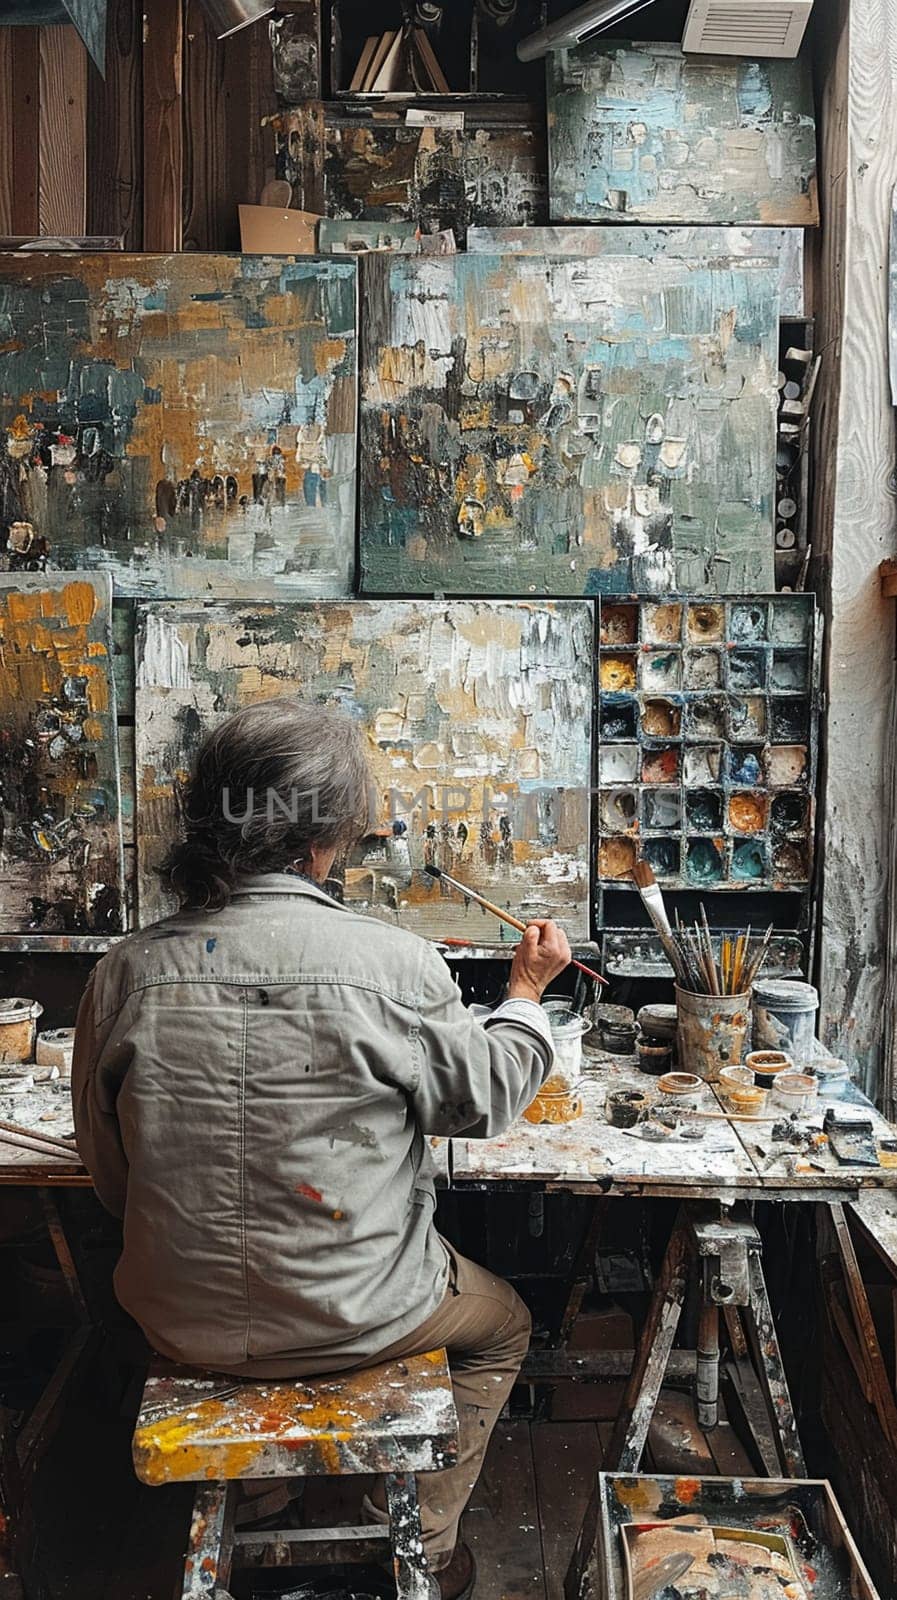 Creative Painter Shares Artistic Process in Bustling Studio, Inspiration and technique are shared as an artist paints amidst a collection of canvases.